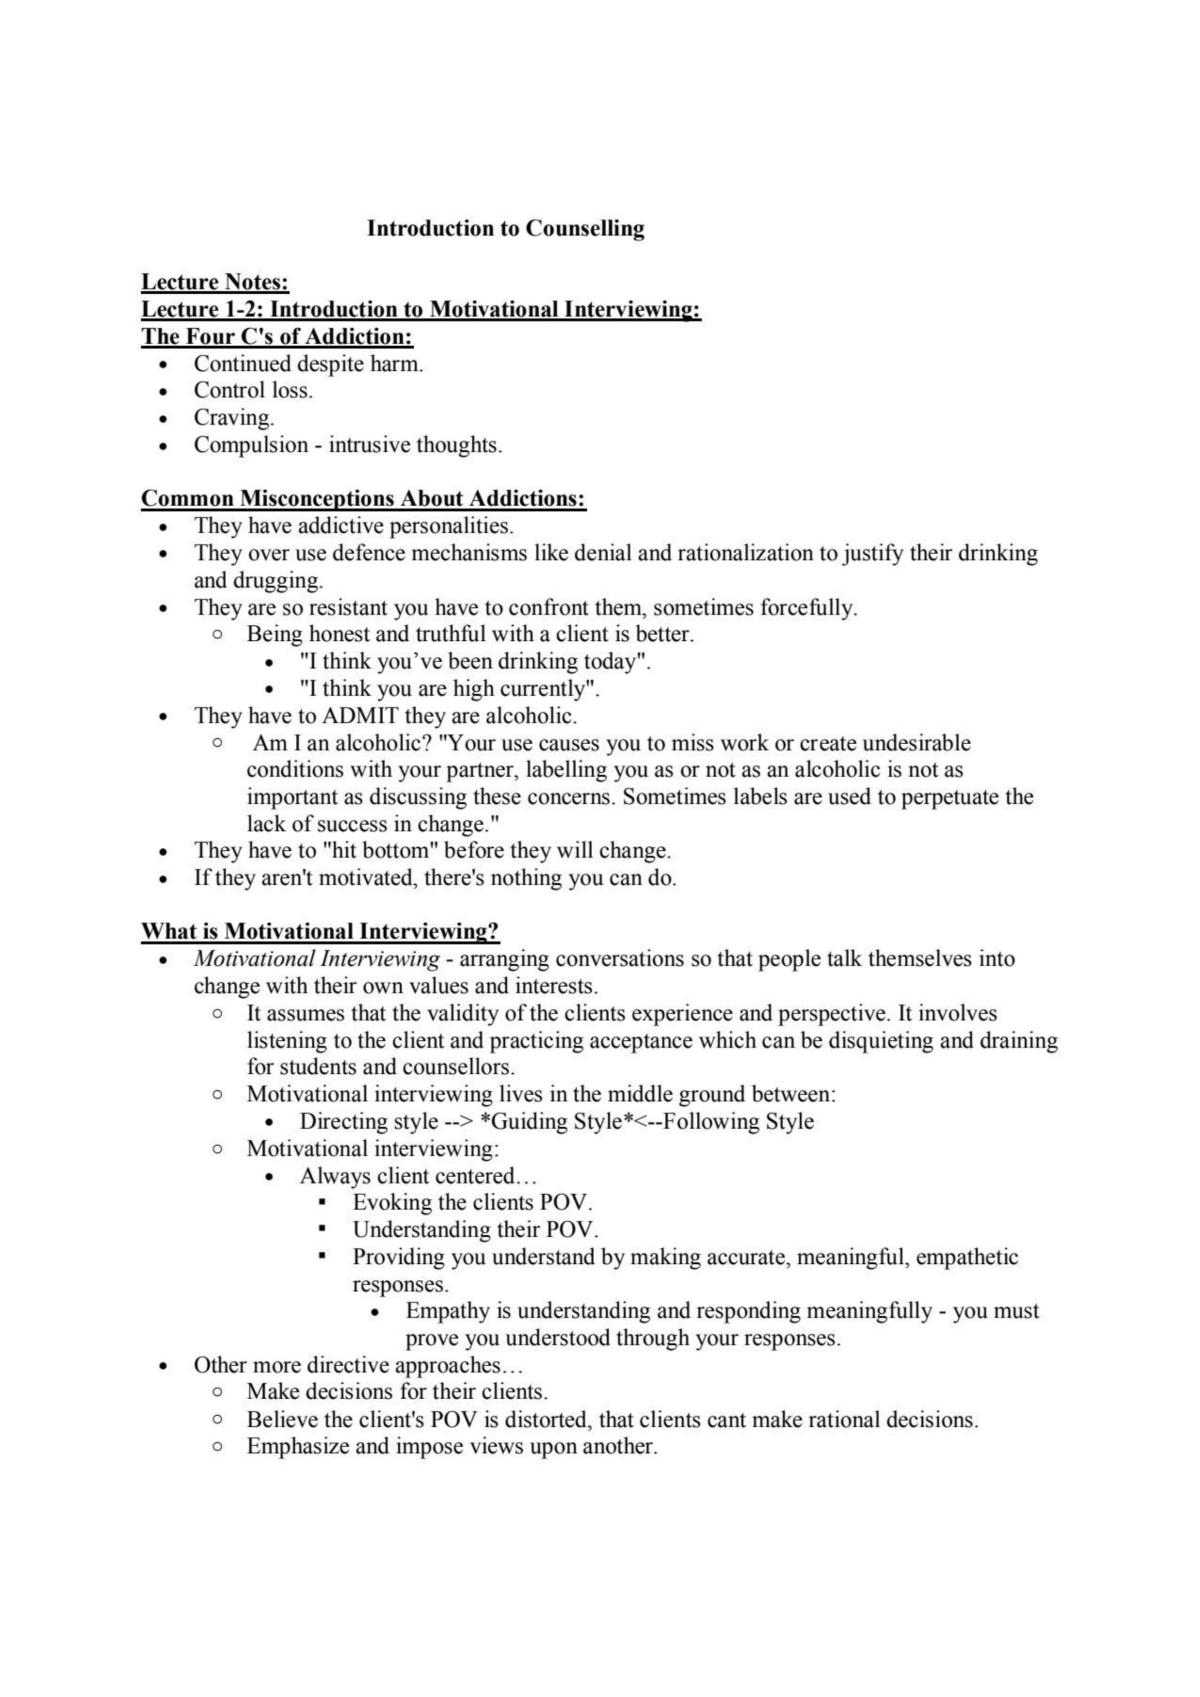 Introduction to Counselling Notes - Page 1